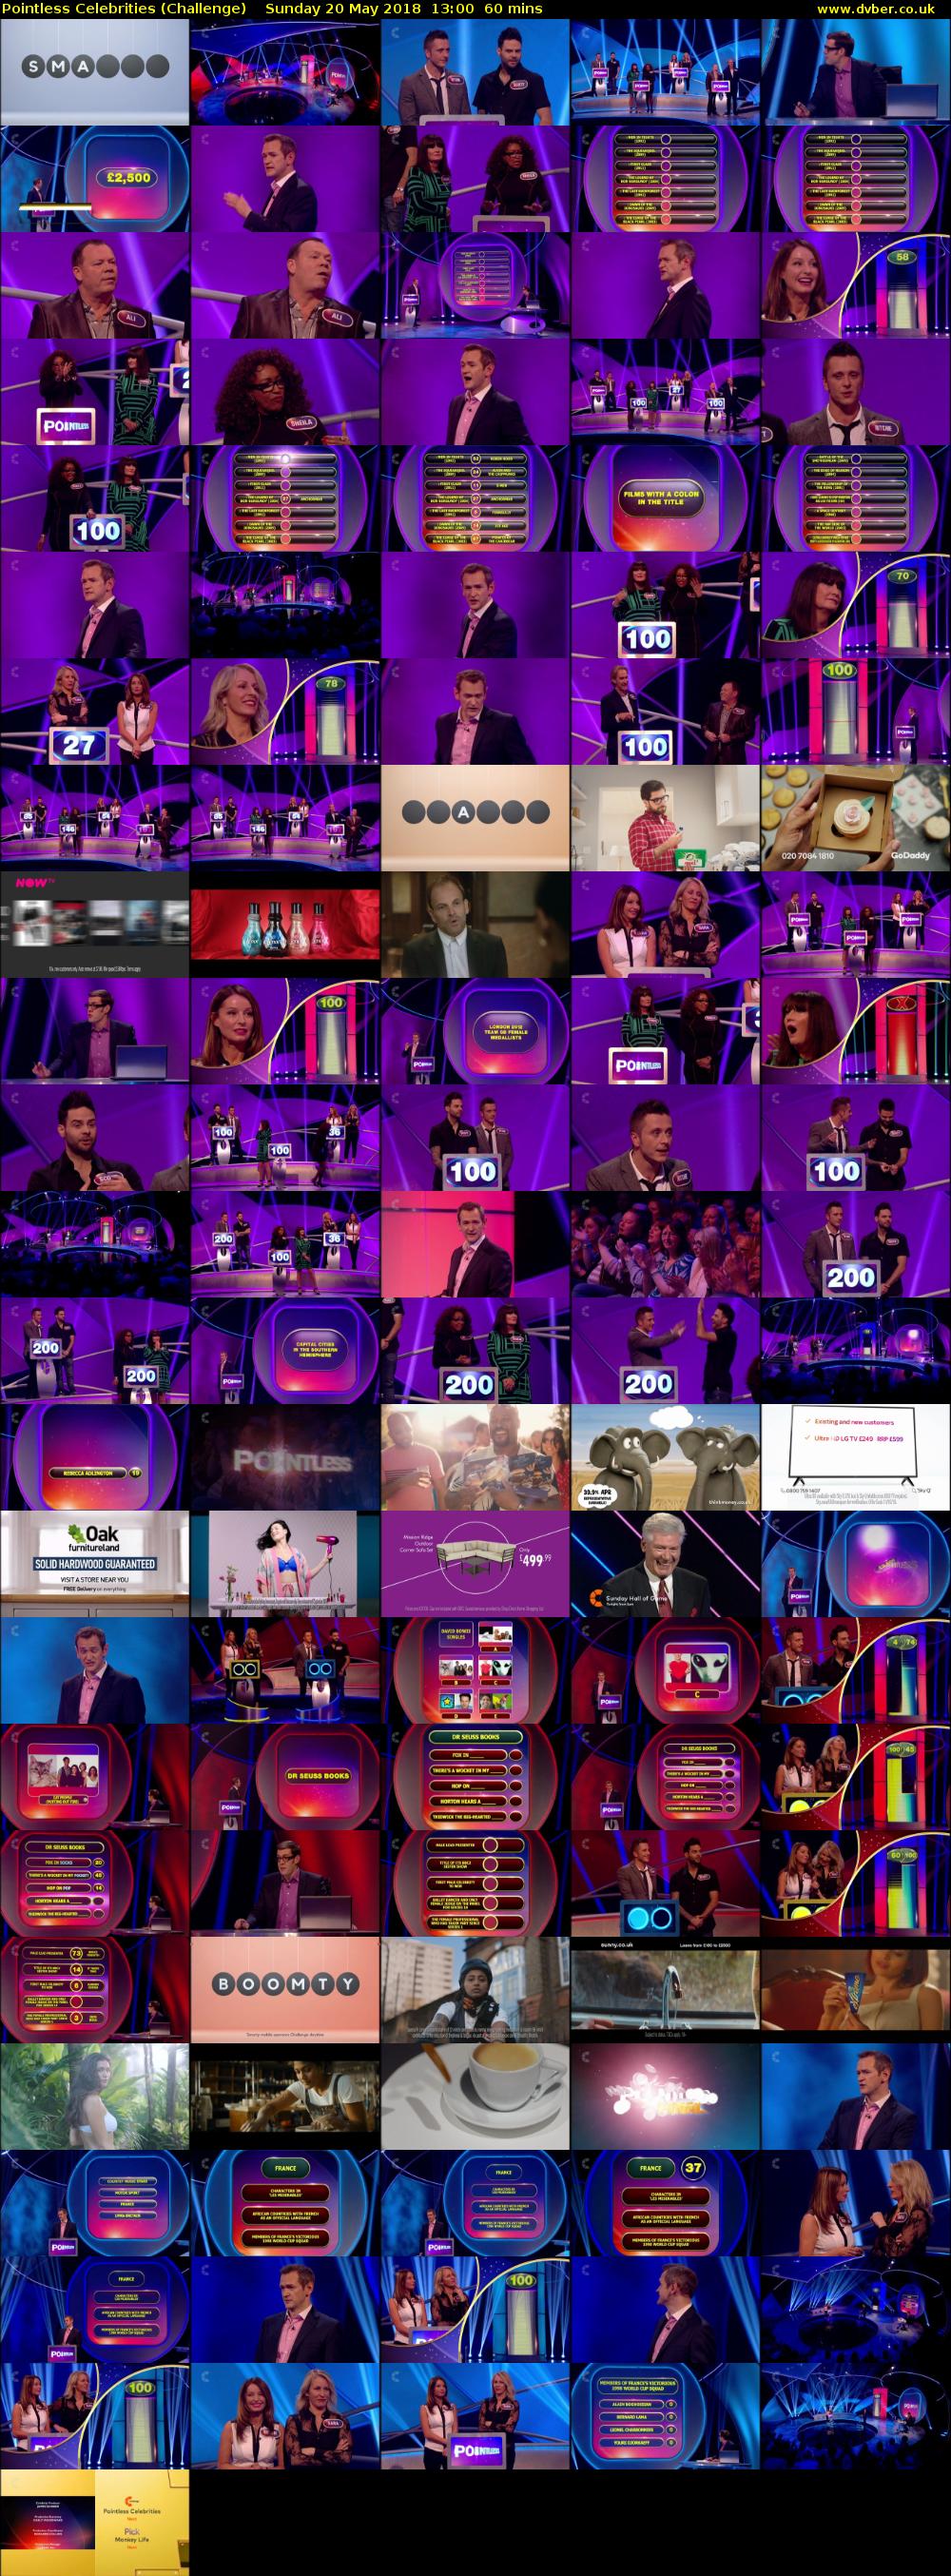 Pointless Celebrities (Challenge) Sunday 20 May 2018 13:00 - 14:00